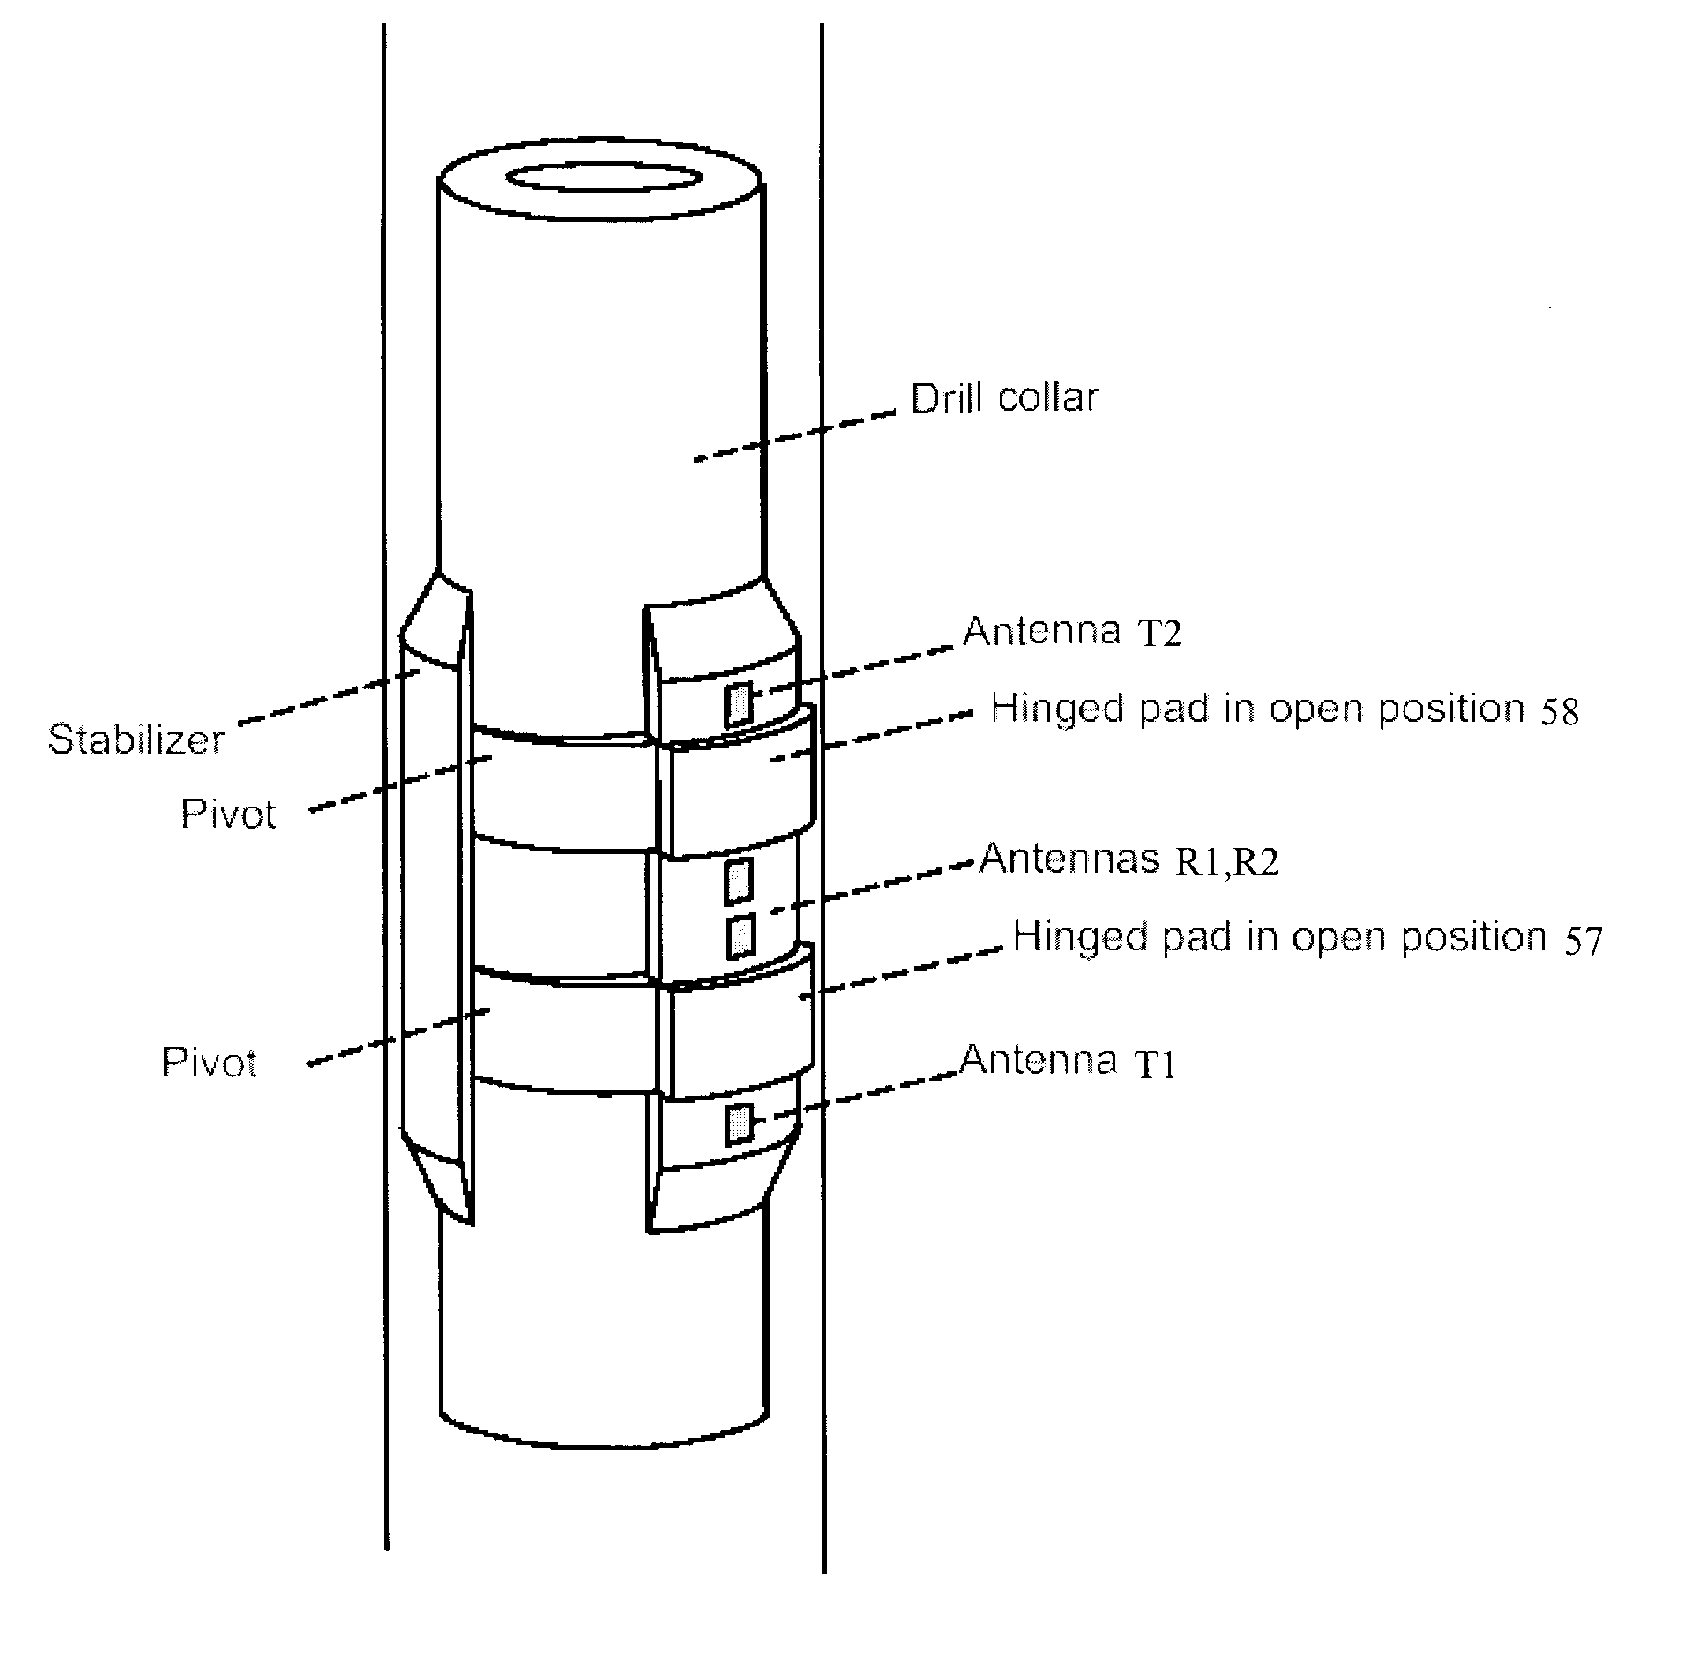 Apparatus and methods for reducing stand-off effects of a downhole tool